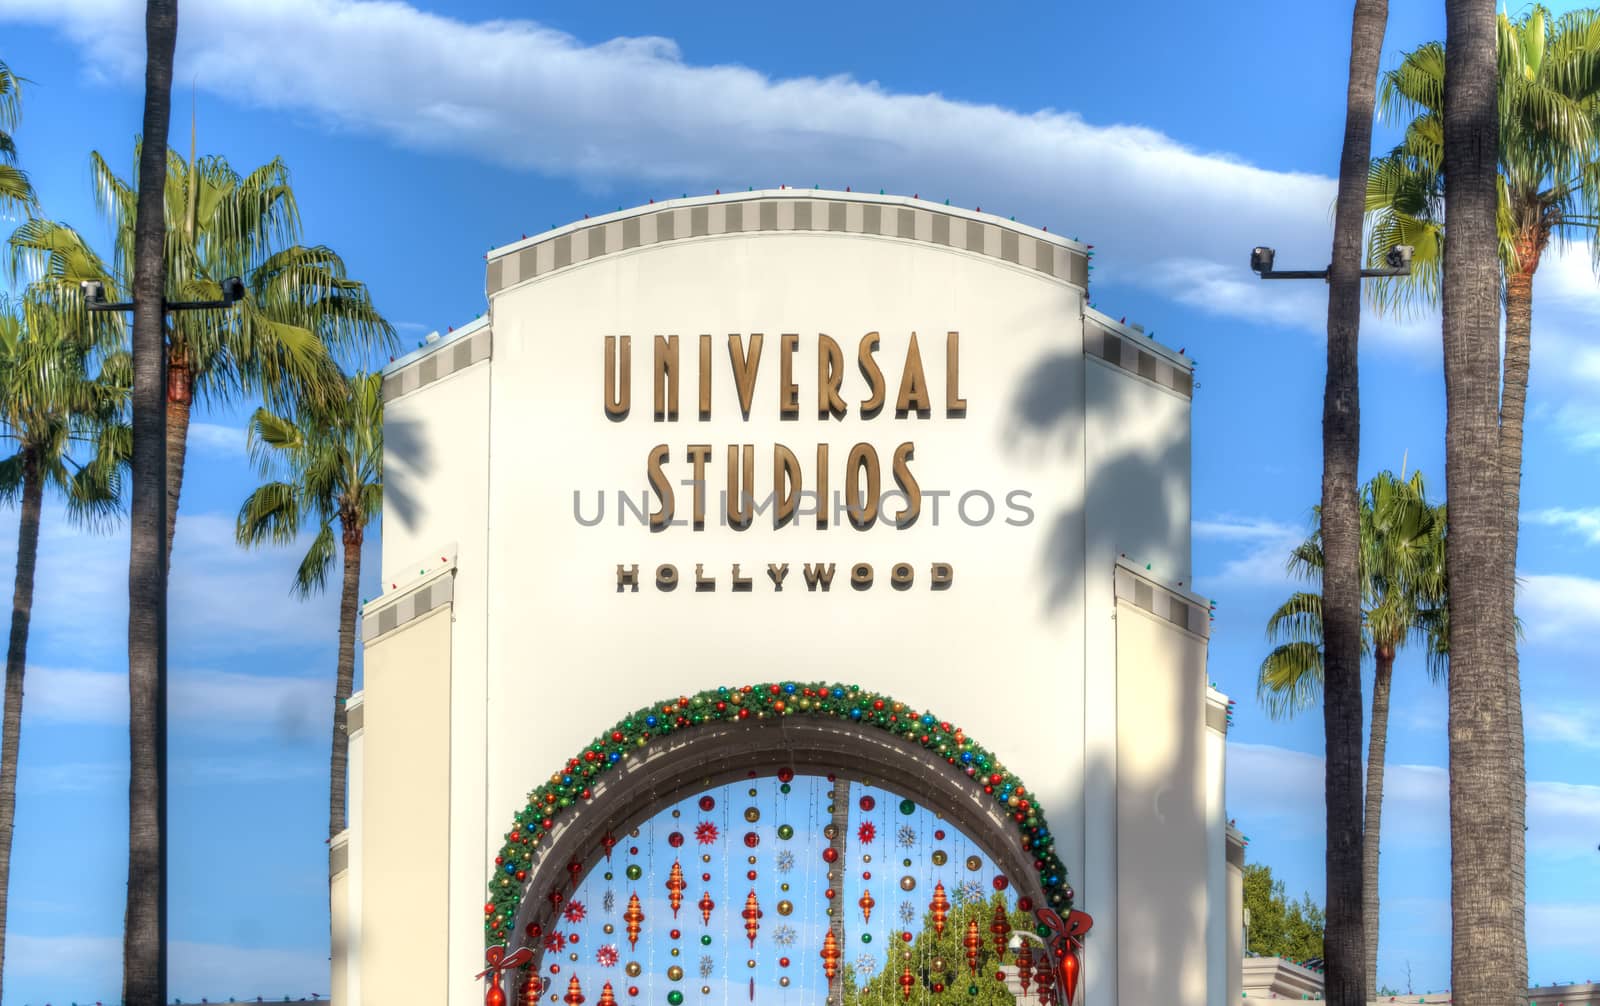 Universal Studios of Hollywood Entrance by wolterk